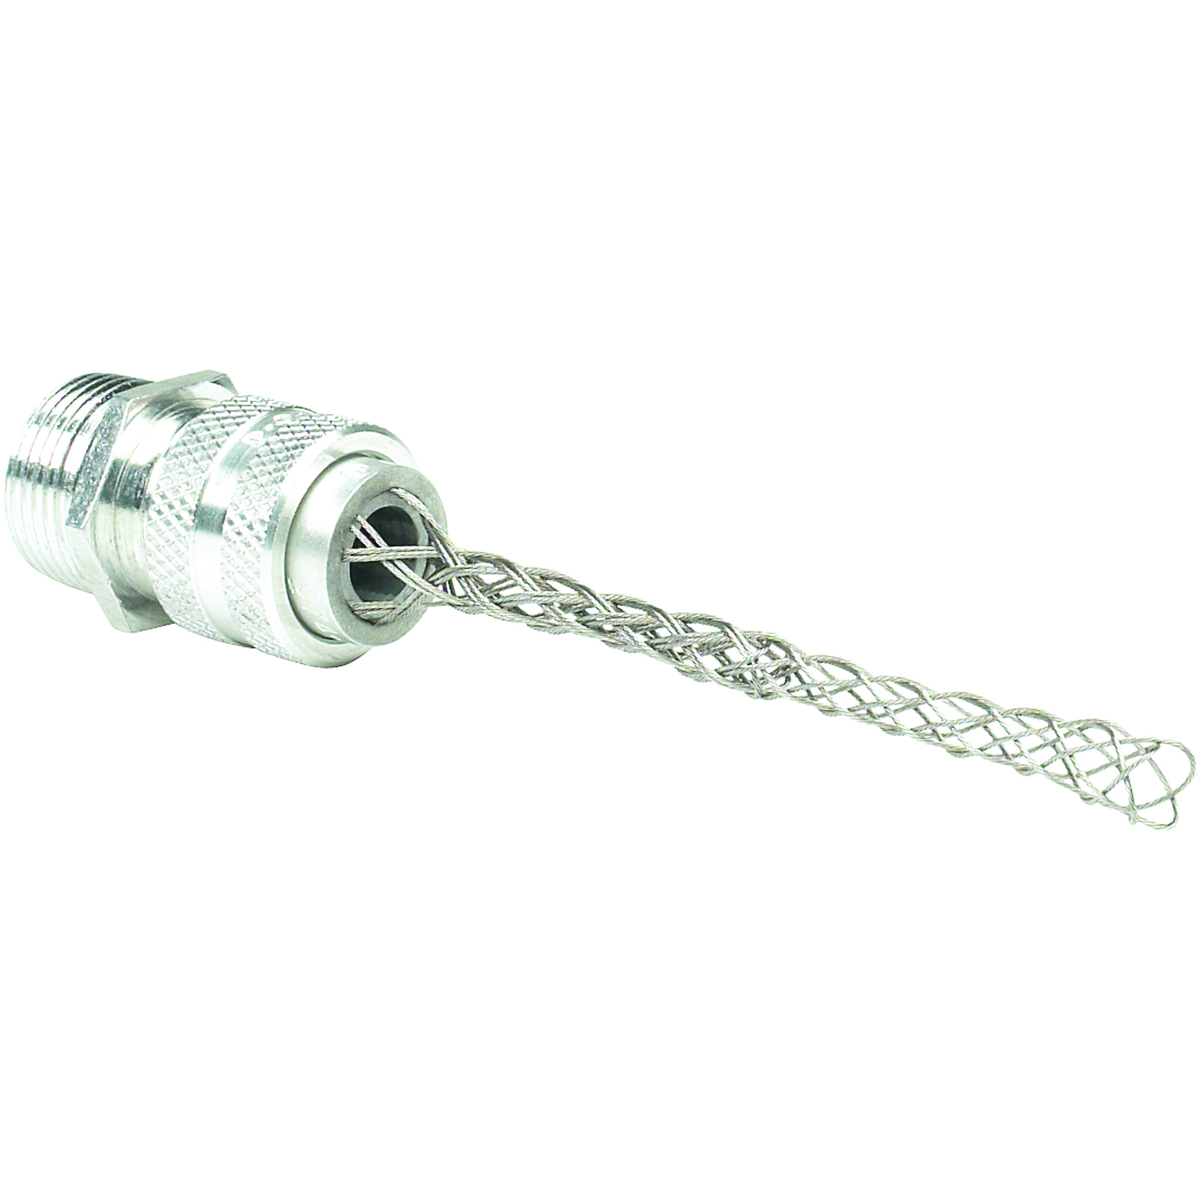 Z SERIES FITTINGS - ALUMINUM CORD CONNECTOR WITH MESH GRIP - Z CORDCONNECTOR - STRAIGHT - NPT SIZE 1 IN - PURPLE